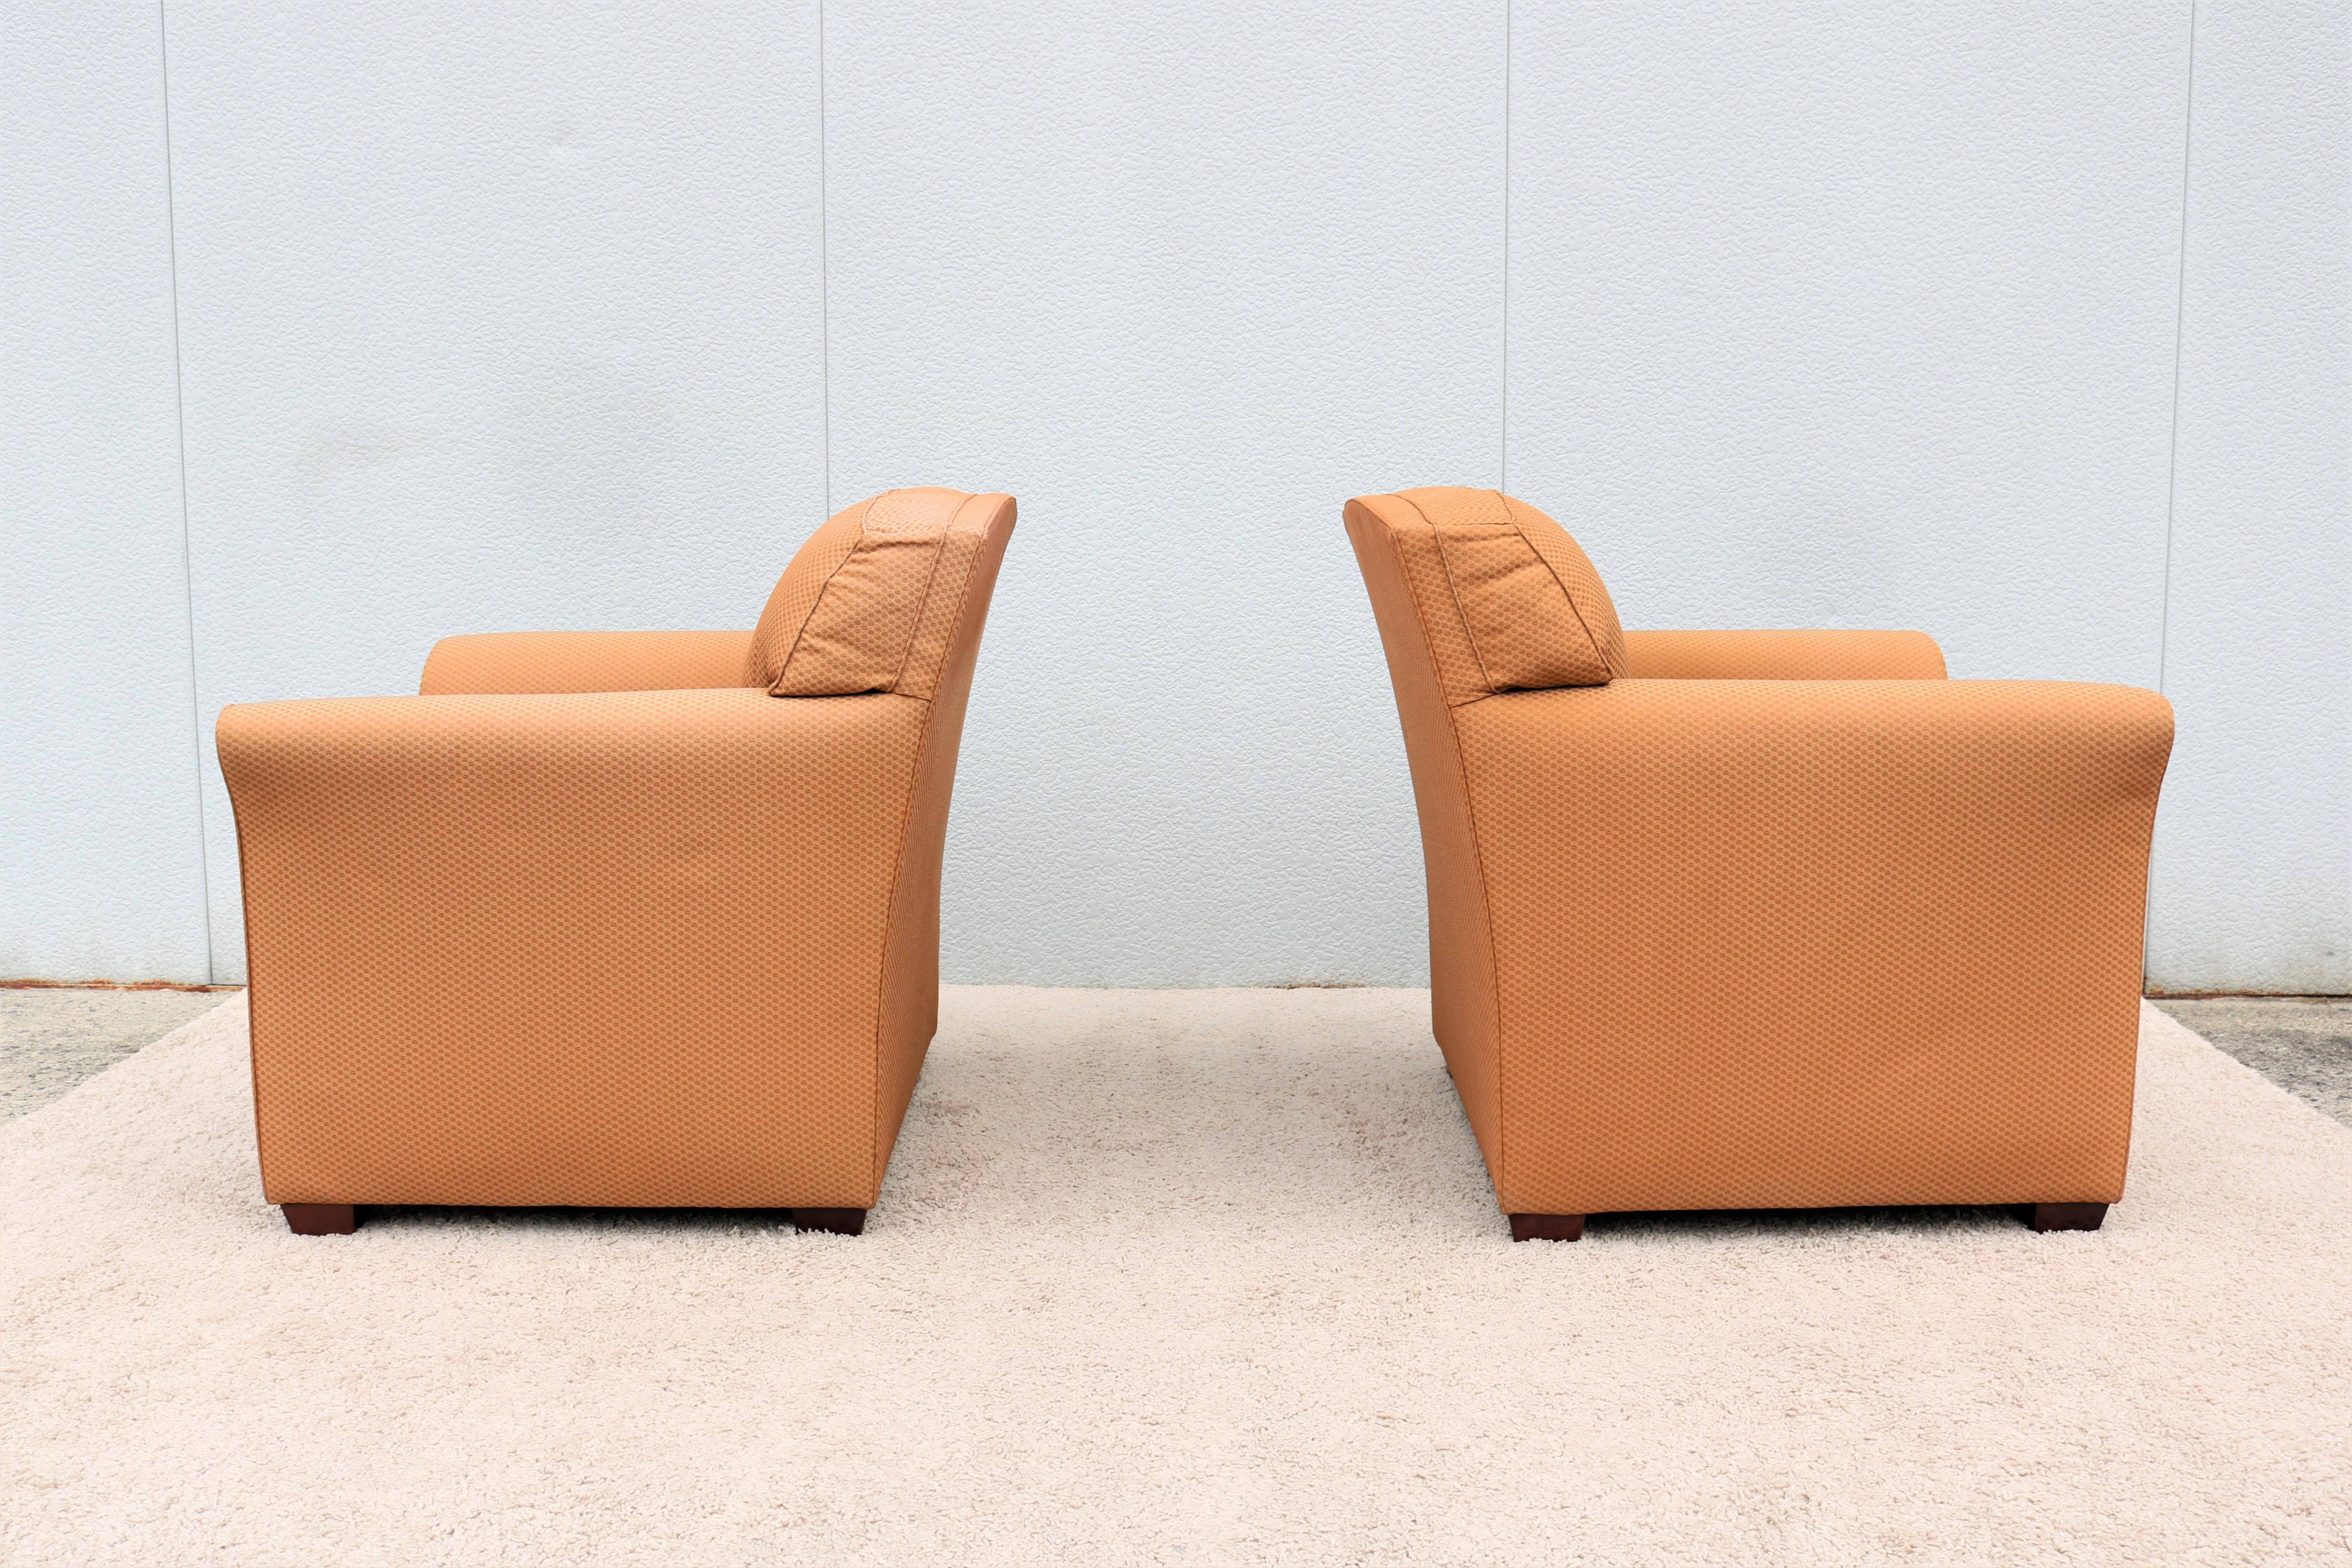 American Classical Bernhardt Lawson American Casual Style Lounge Chairs Very Comfortable, a Pair